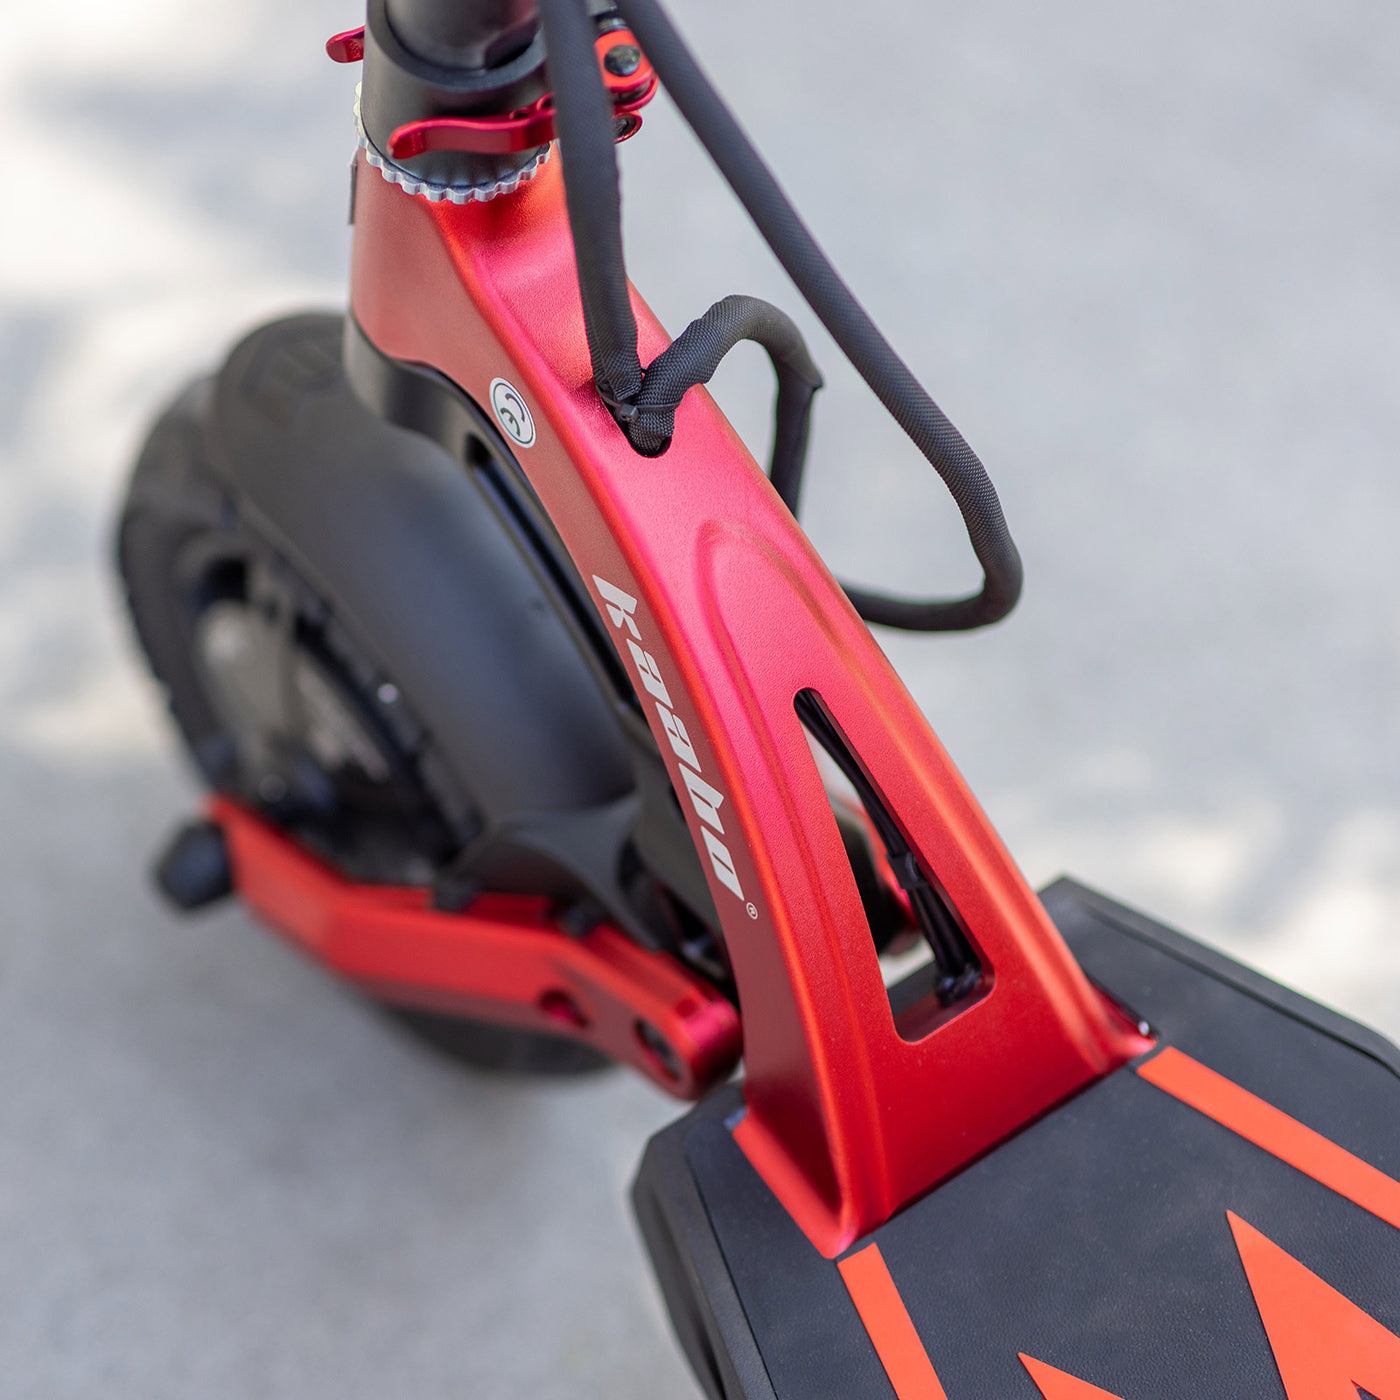 Close-up details of the Kaabo USA Mantis 10 Lite Electric Scooter's features